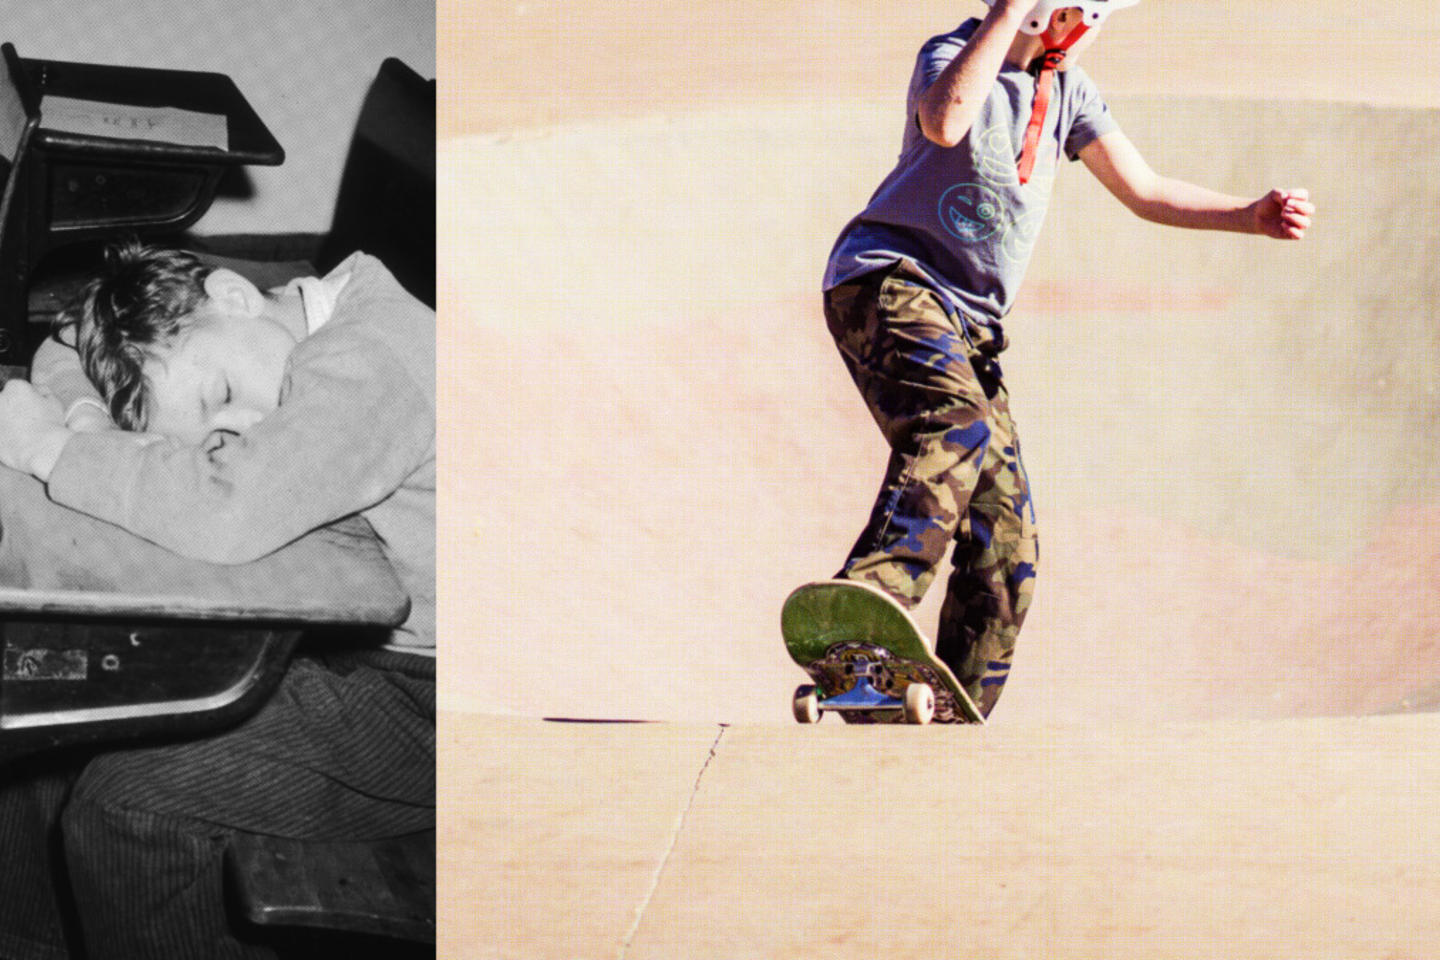 A split image, showing a black-and-white photo on the left of a child asleep at their desk, and a color photo on the right of a child on a skateboard